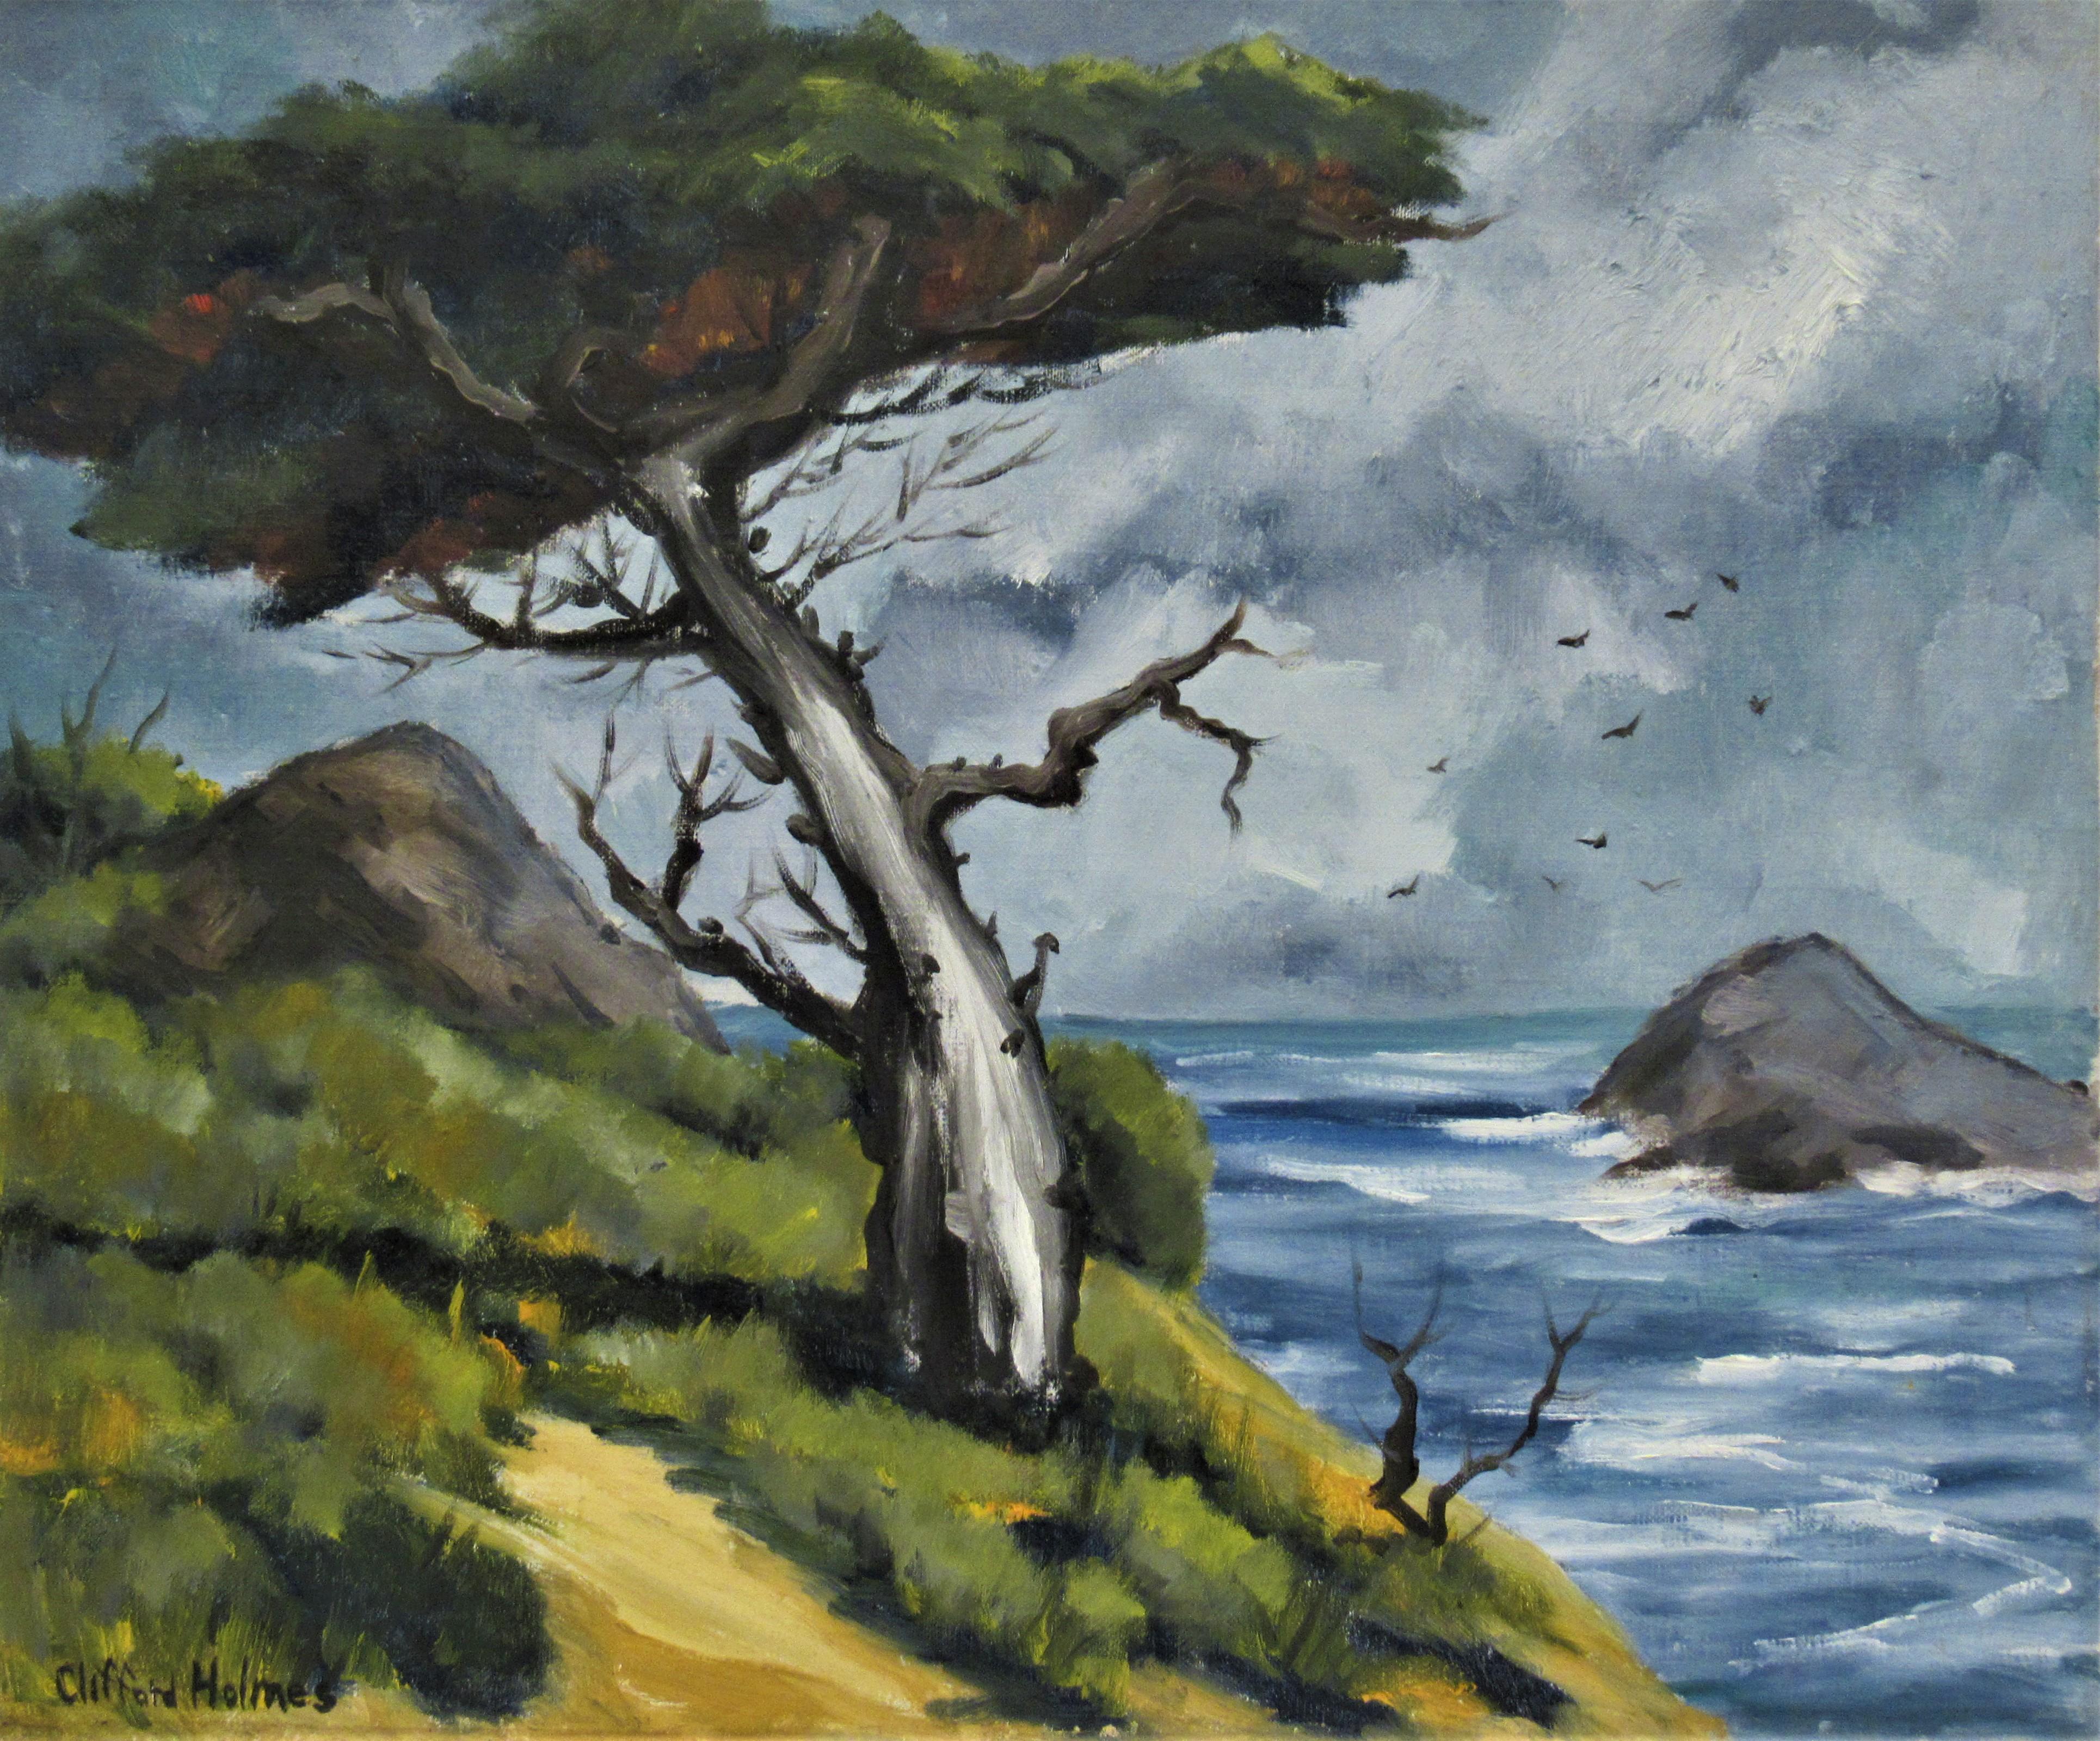 Clifford Holmes Still-Life Painting - Coastal Scene with Cypress